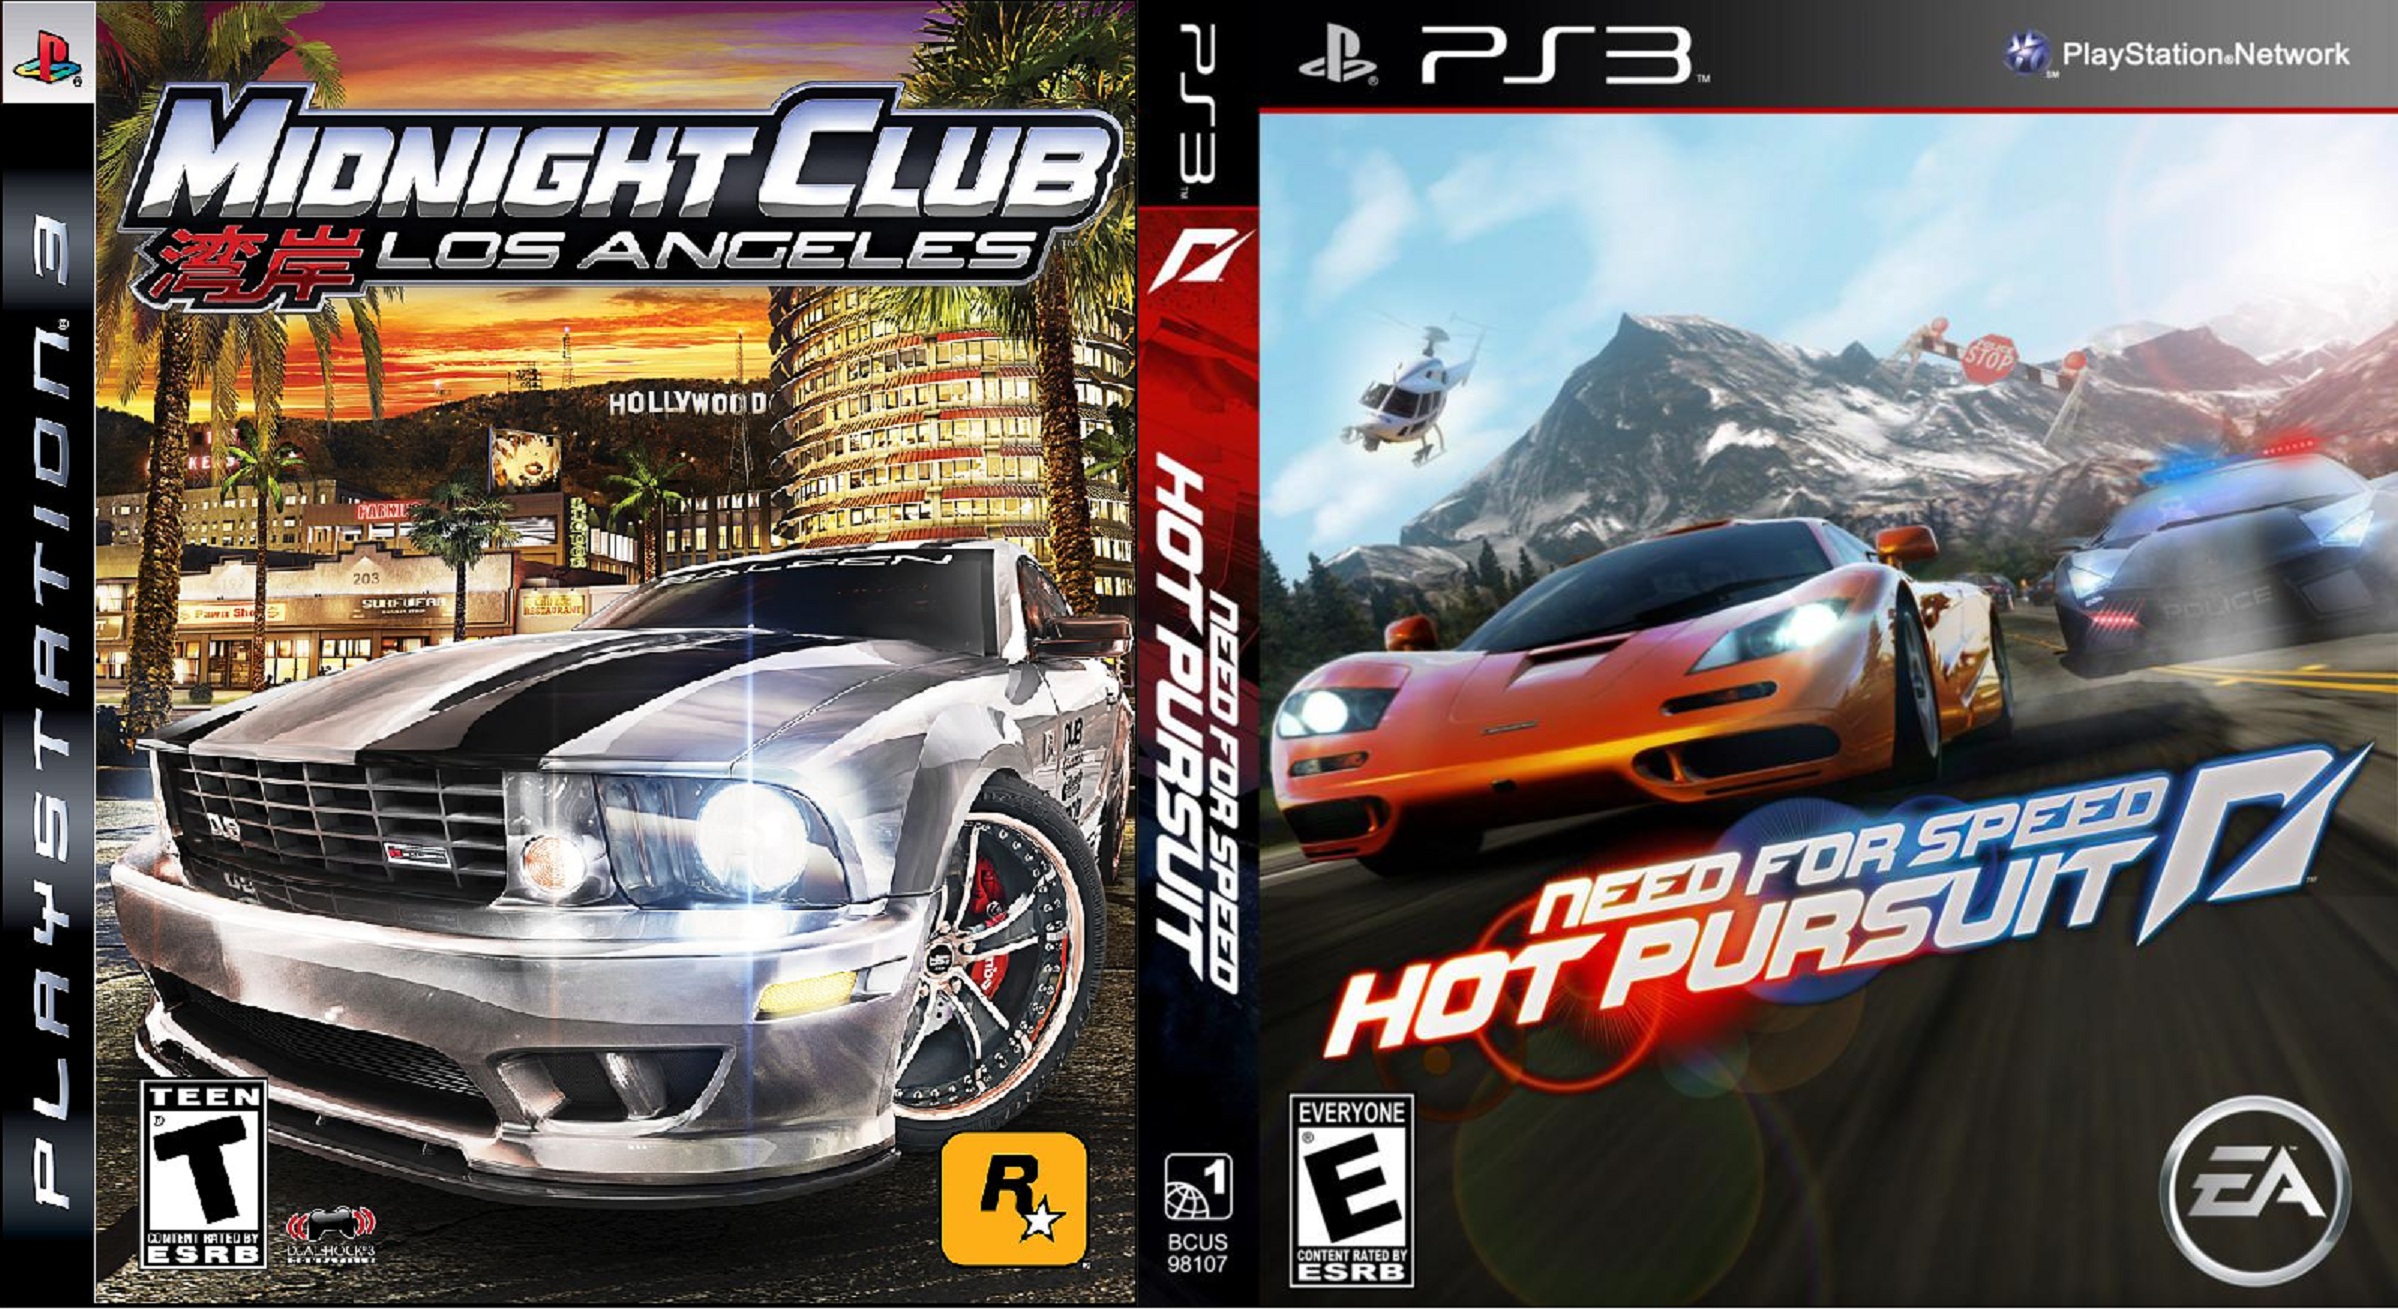 PS3 NFS Hot Pursuit trading with Midnight Club Los Angeles large image 0